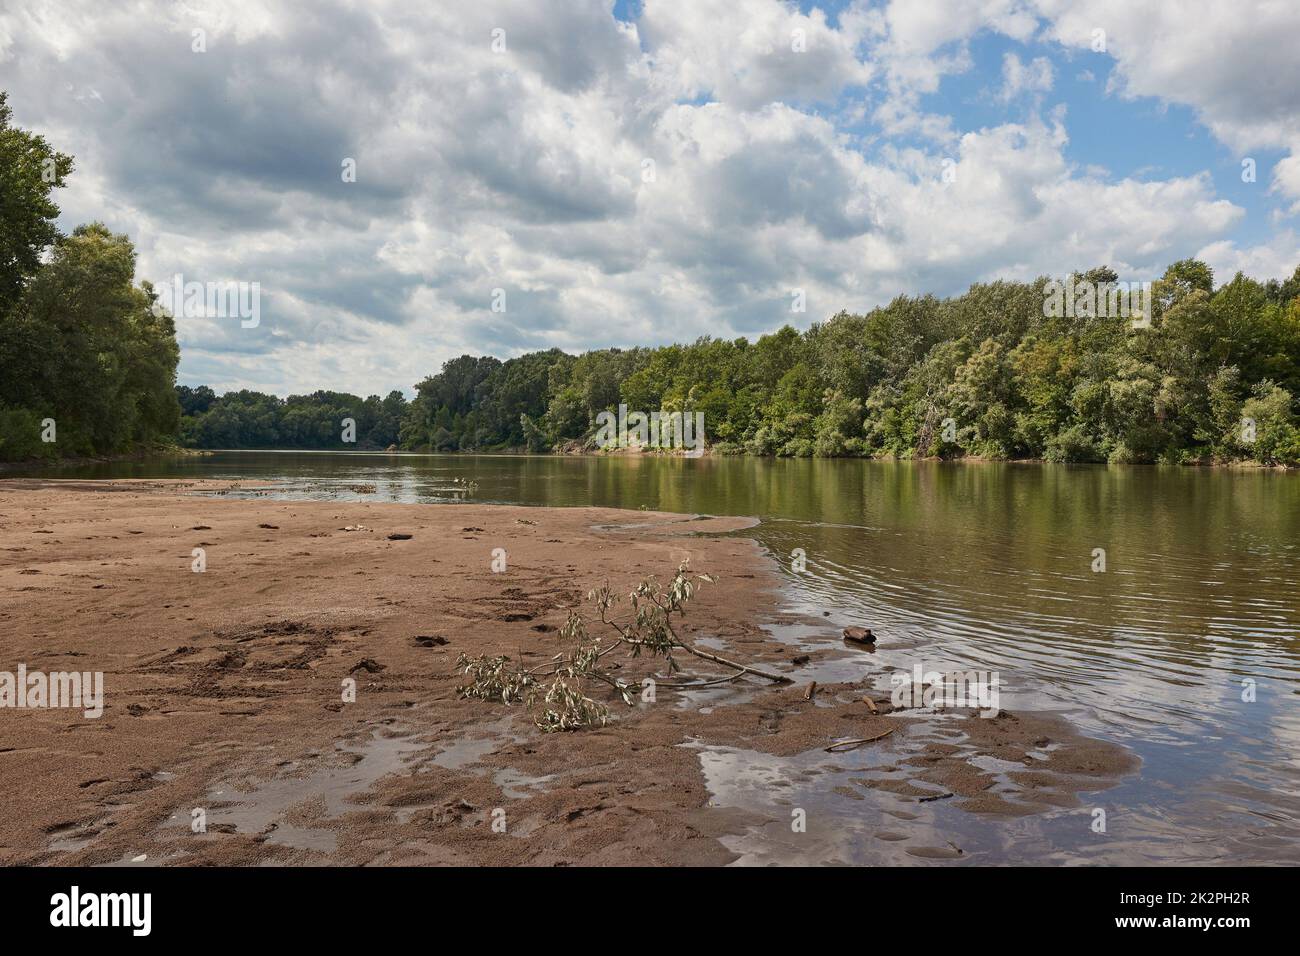 River landscape with sand banks, Tisza Stock Photo